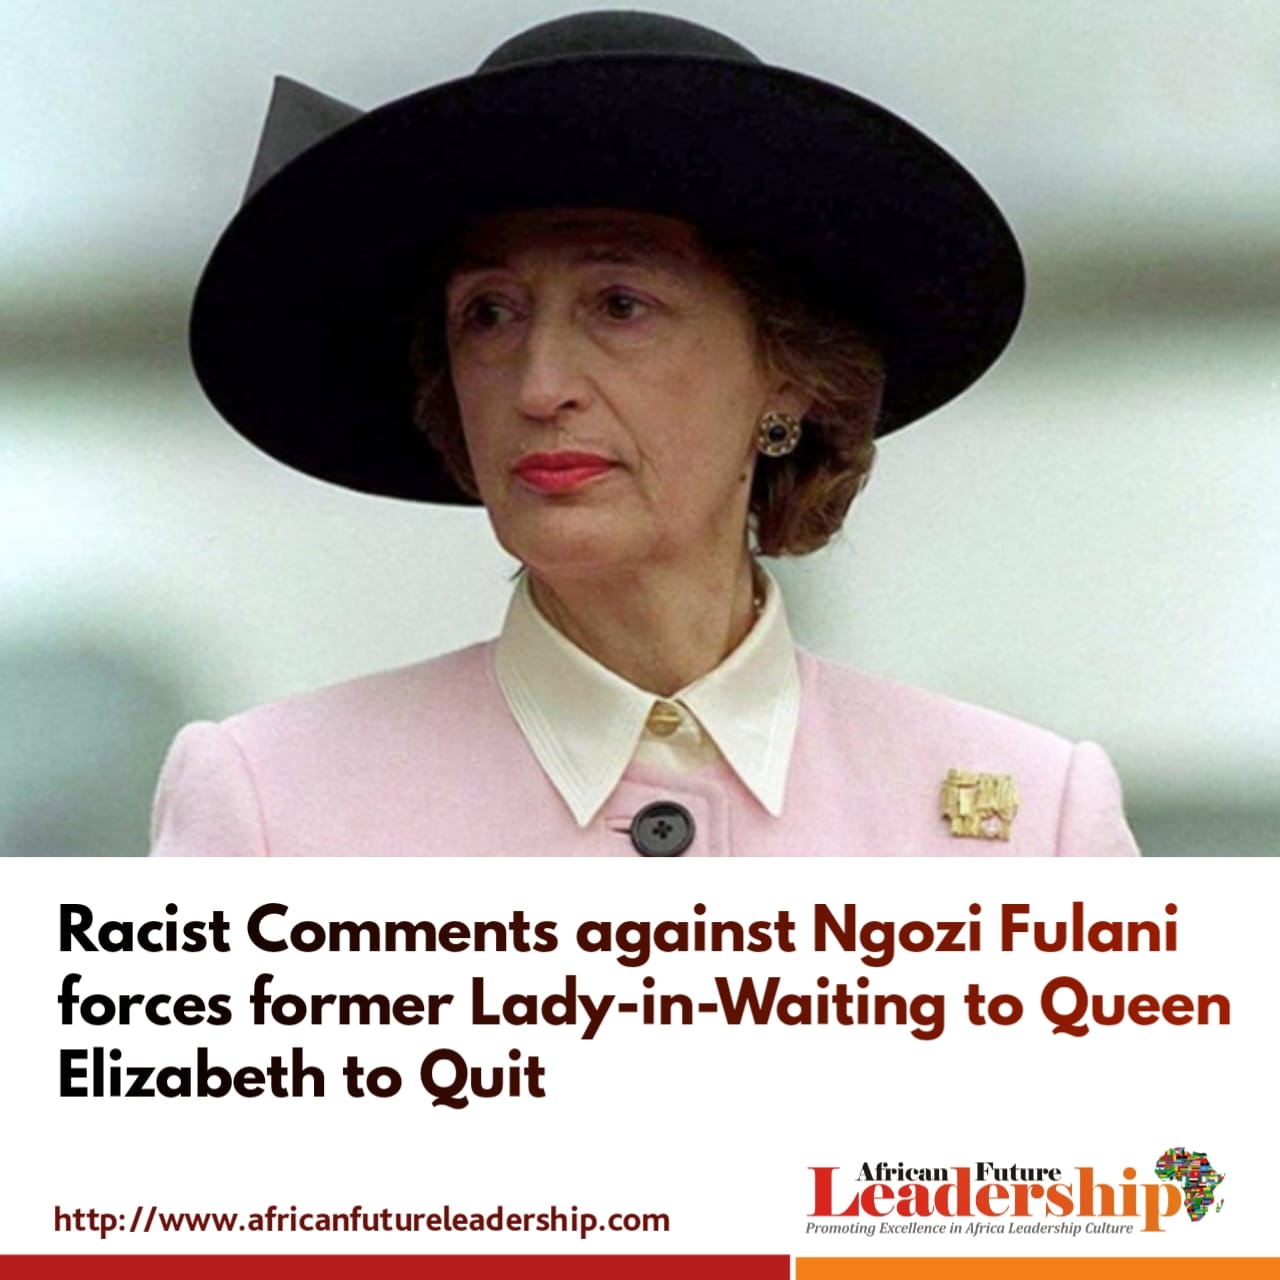 Racist Comments against Ngozi Fulani forces former Lady-in-Waiting to Queen Elizabeth to Quit